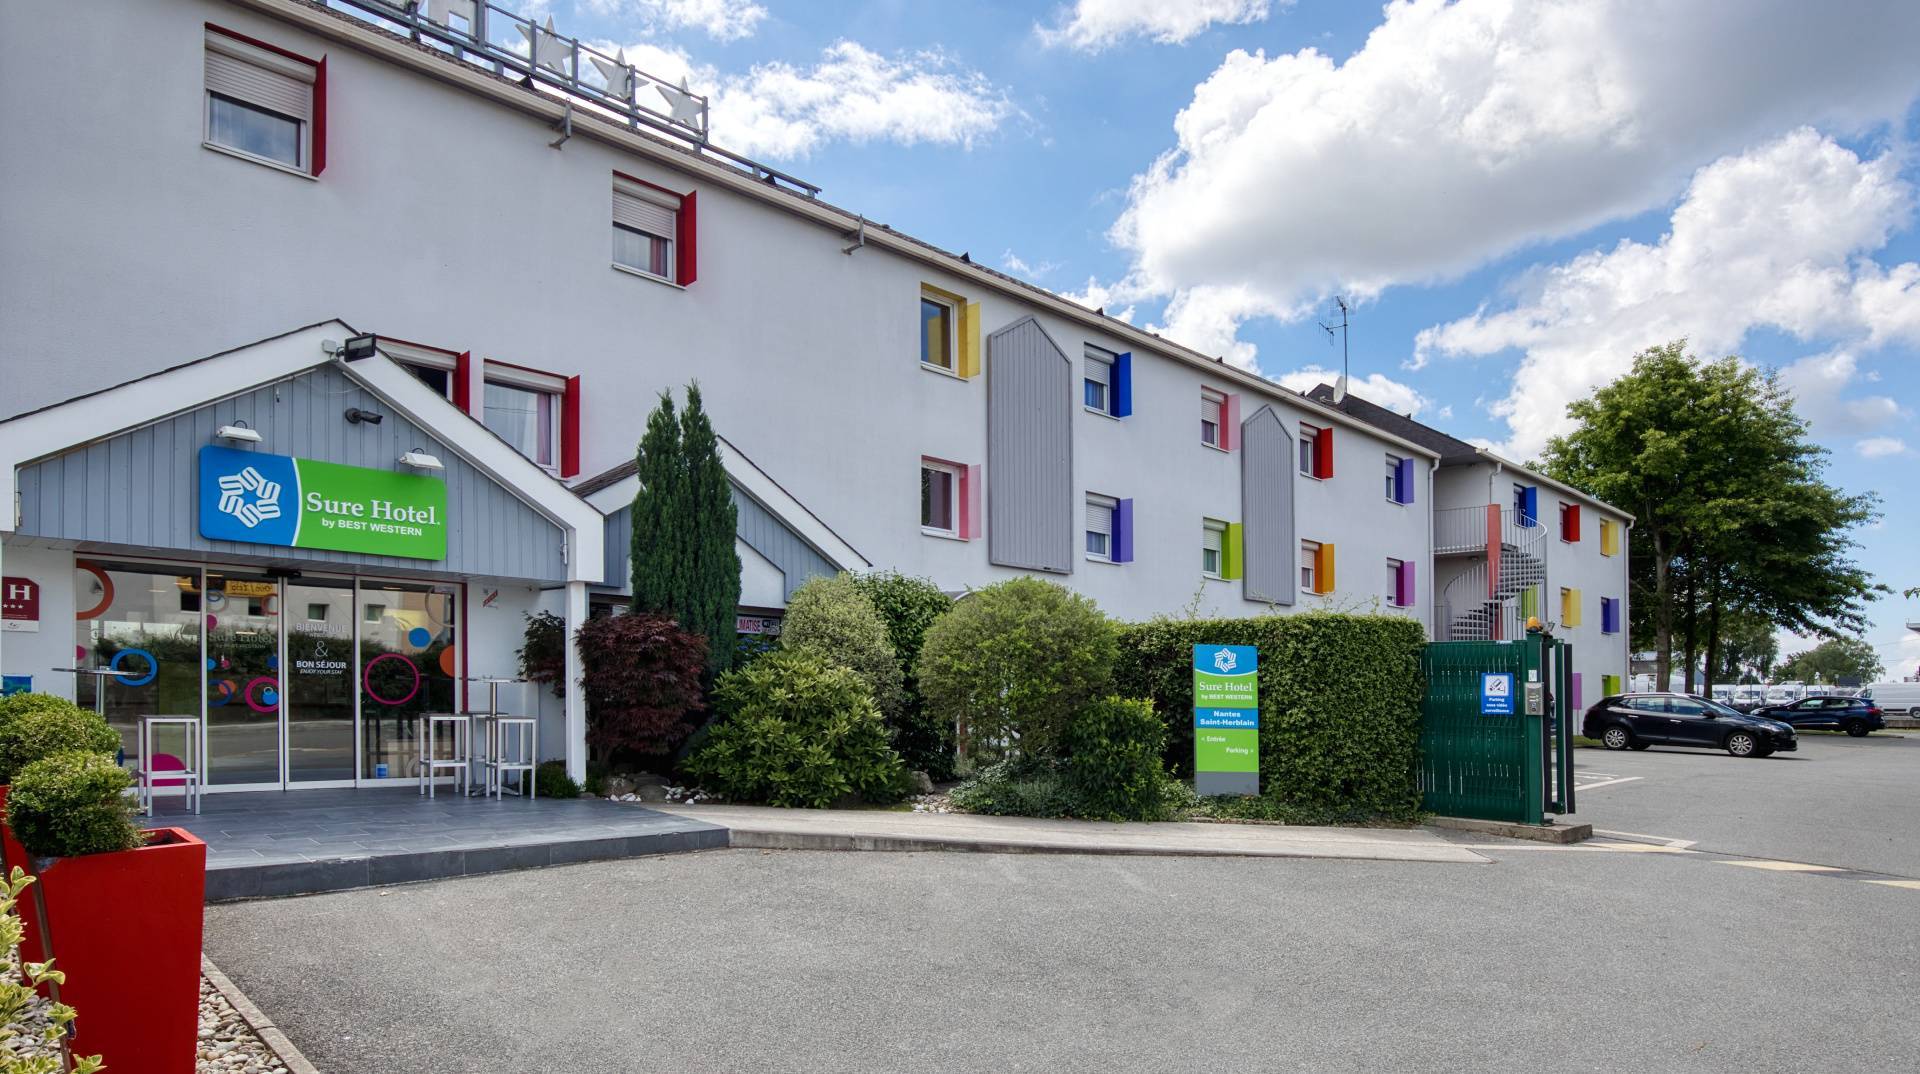 Hotel with private parking | Sure Hôtel, hotel in Saint-Herblain near the Zénith in Nantes